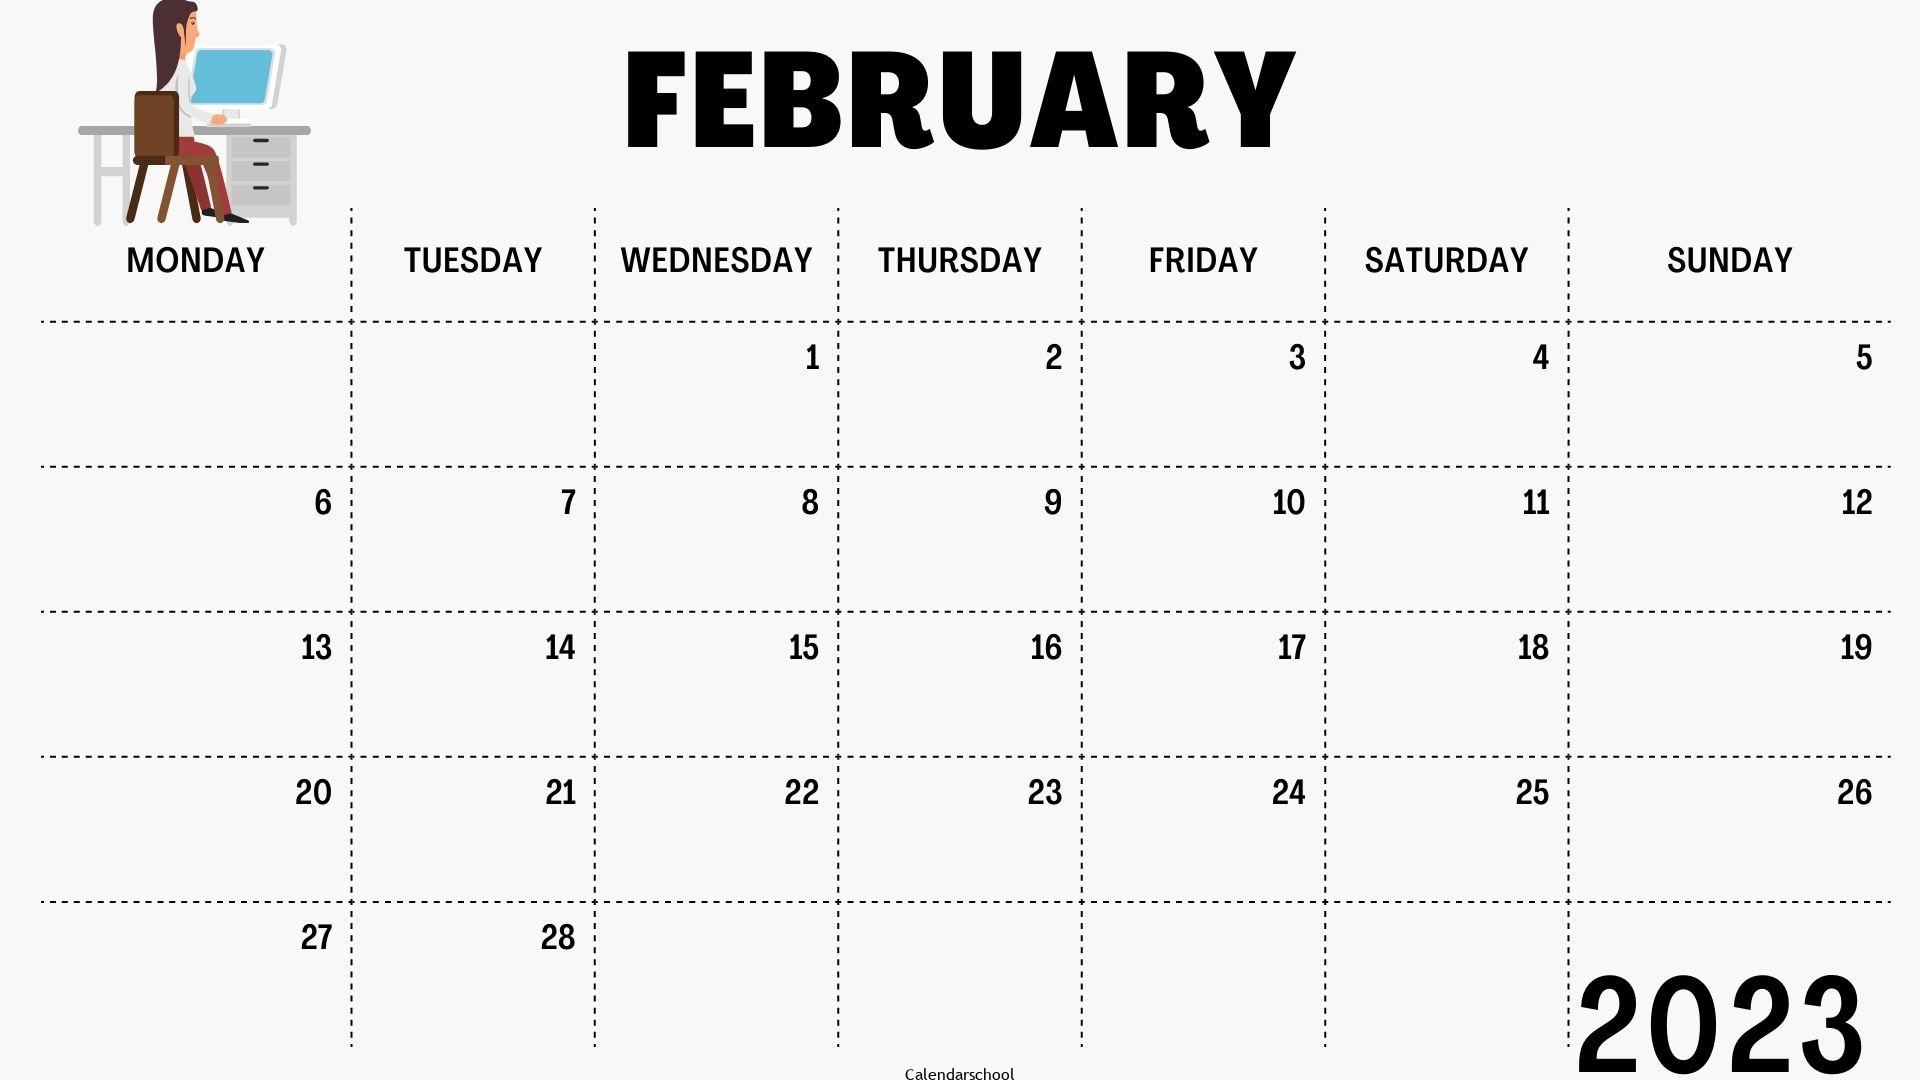 February 2023 Calendar Template Excel Free Download